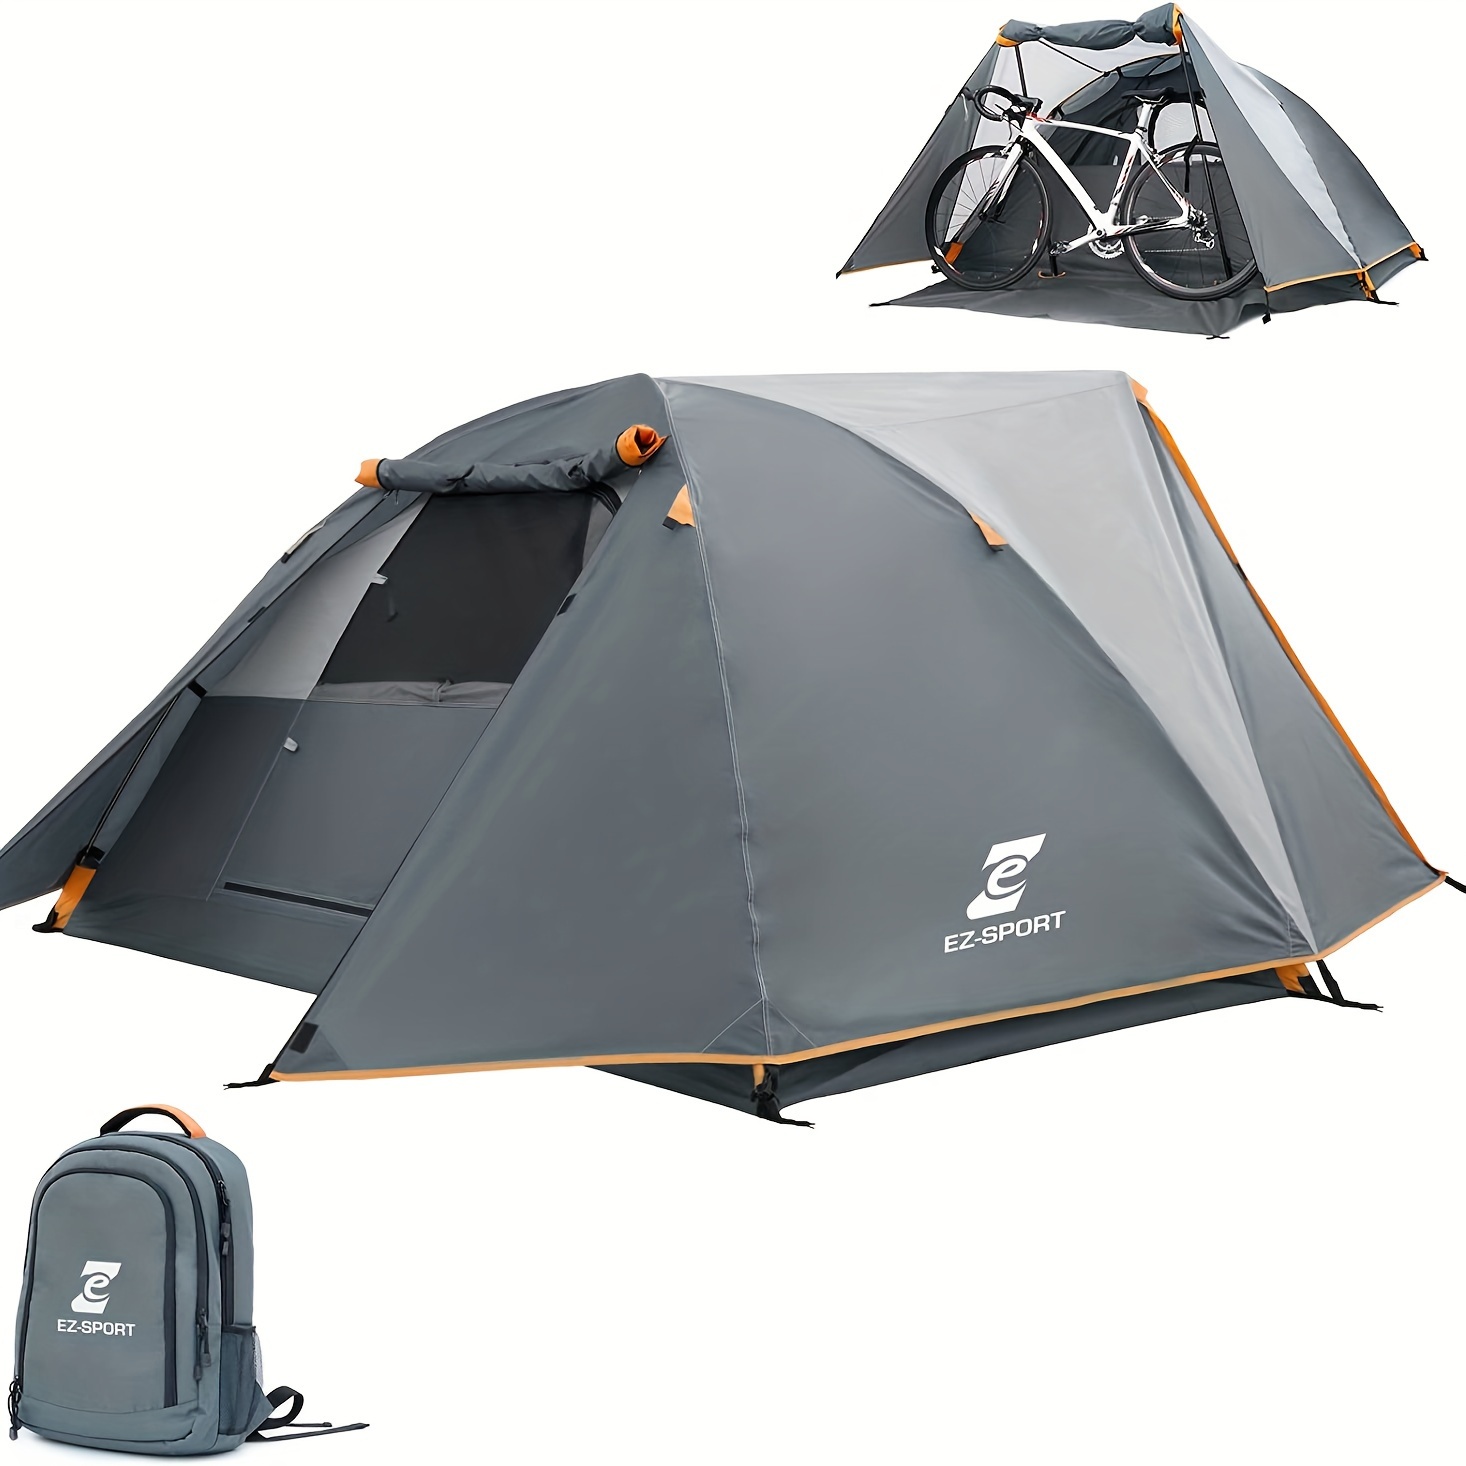 

Camping Tent For 2 Person, Aluminum Poles Tent With Bike Shed And Rainfly - Portable Dome Tents For Camping